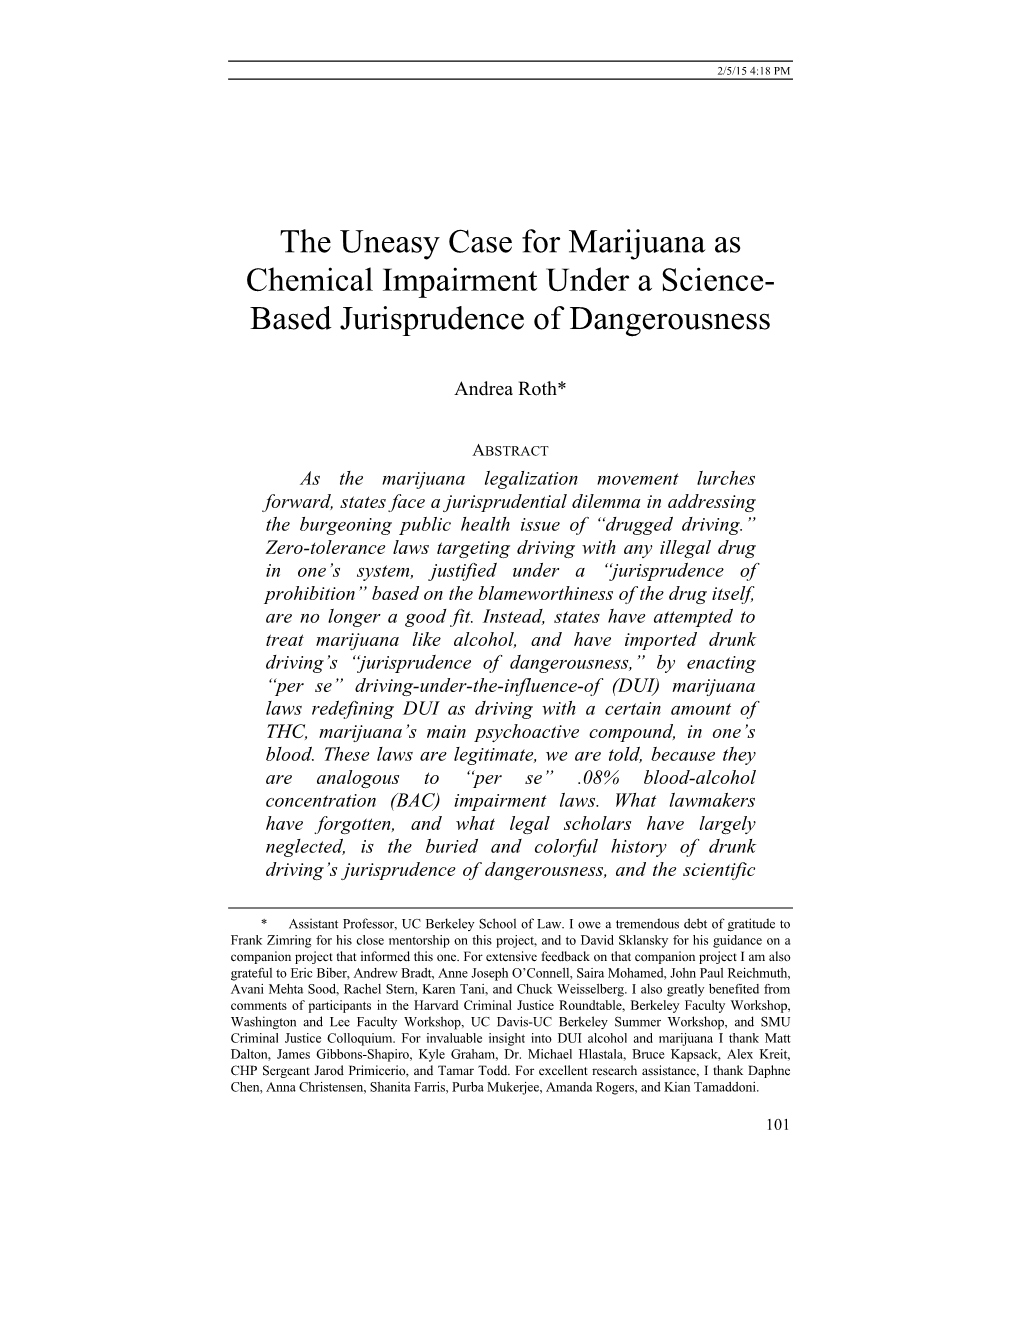 The Uneasy Case for Marijuana As Chemical Impairment Under a Science- Based Jurisprudence of Dangerousness